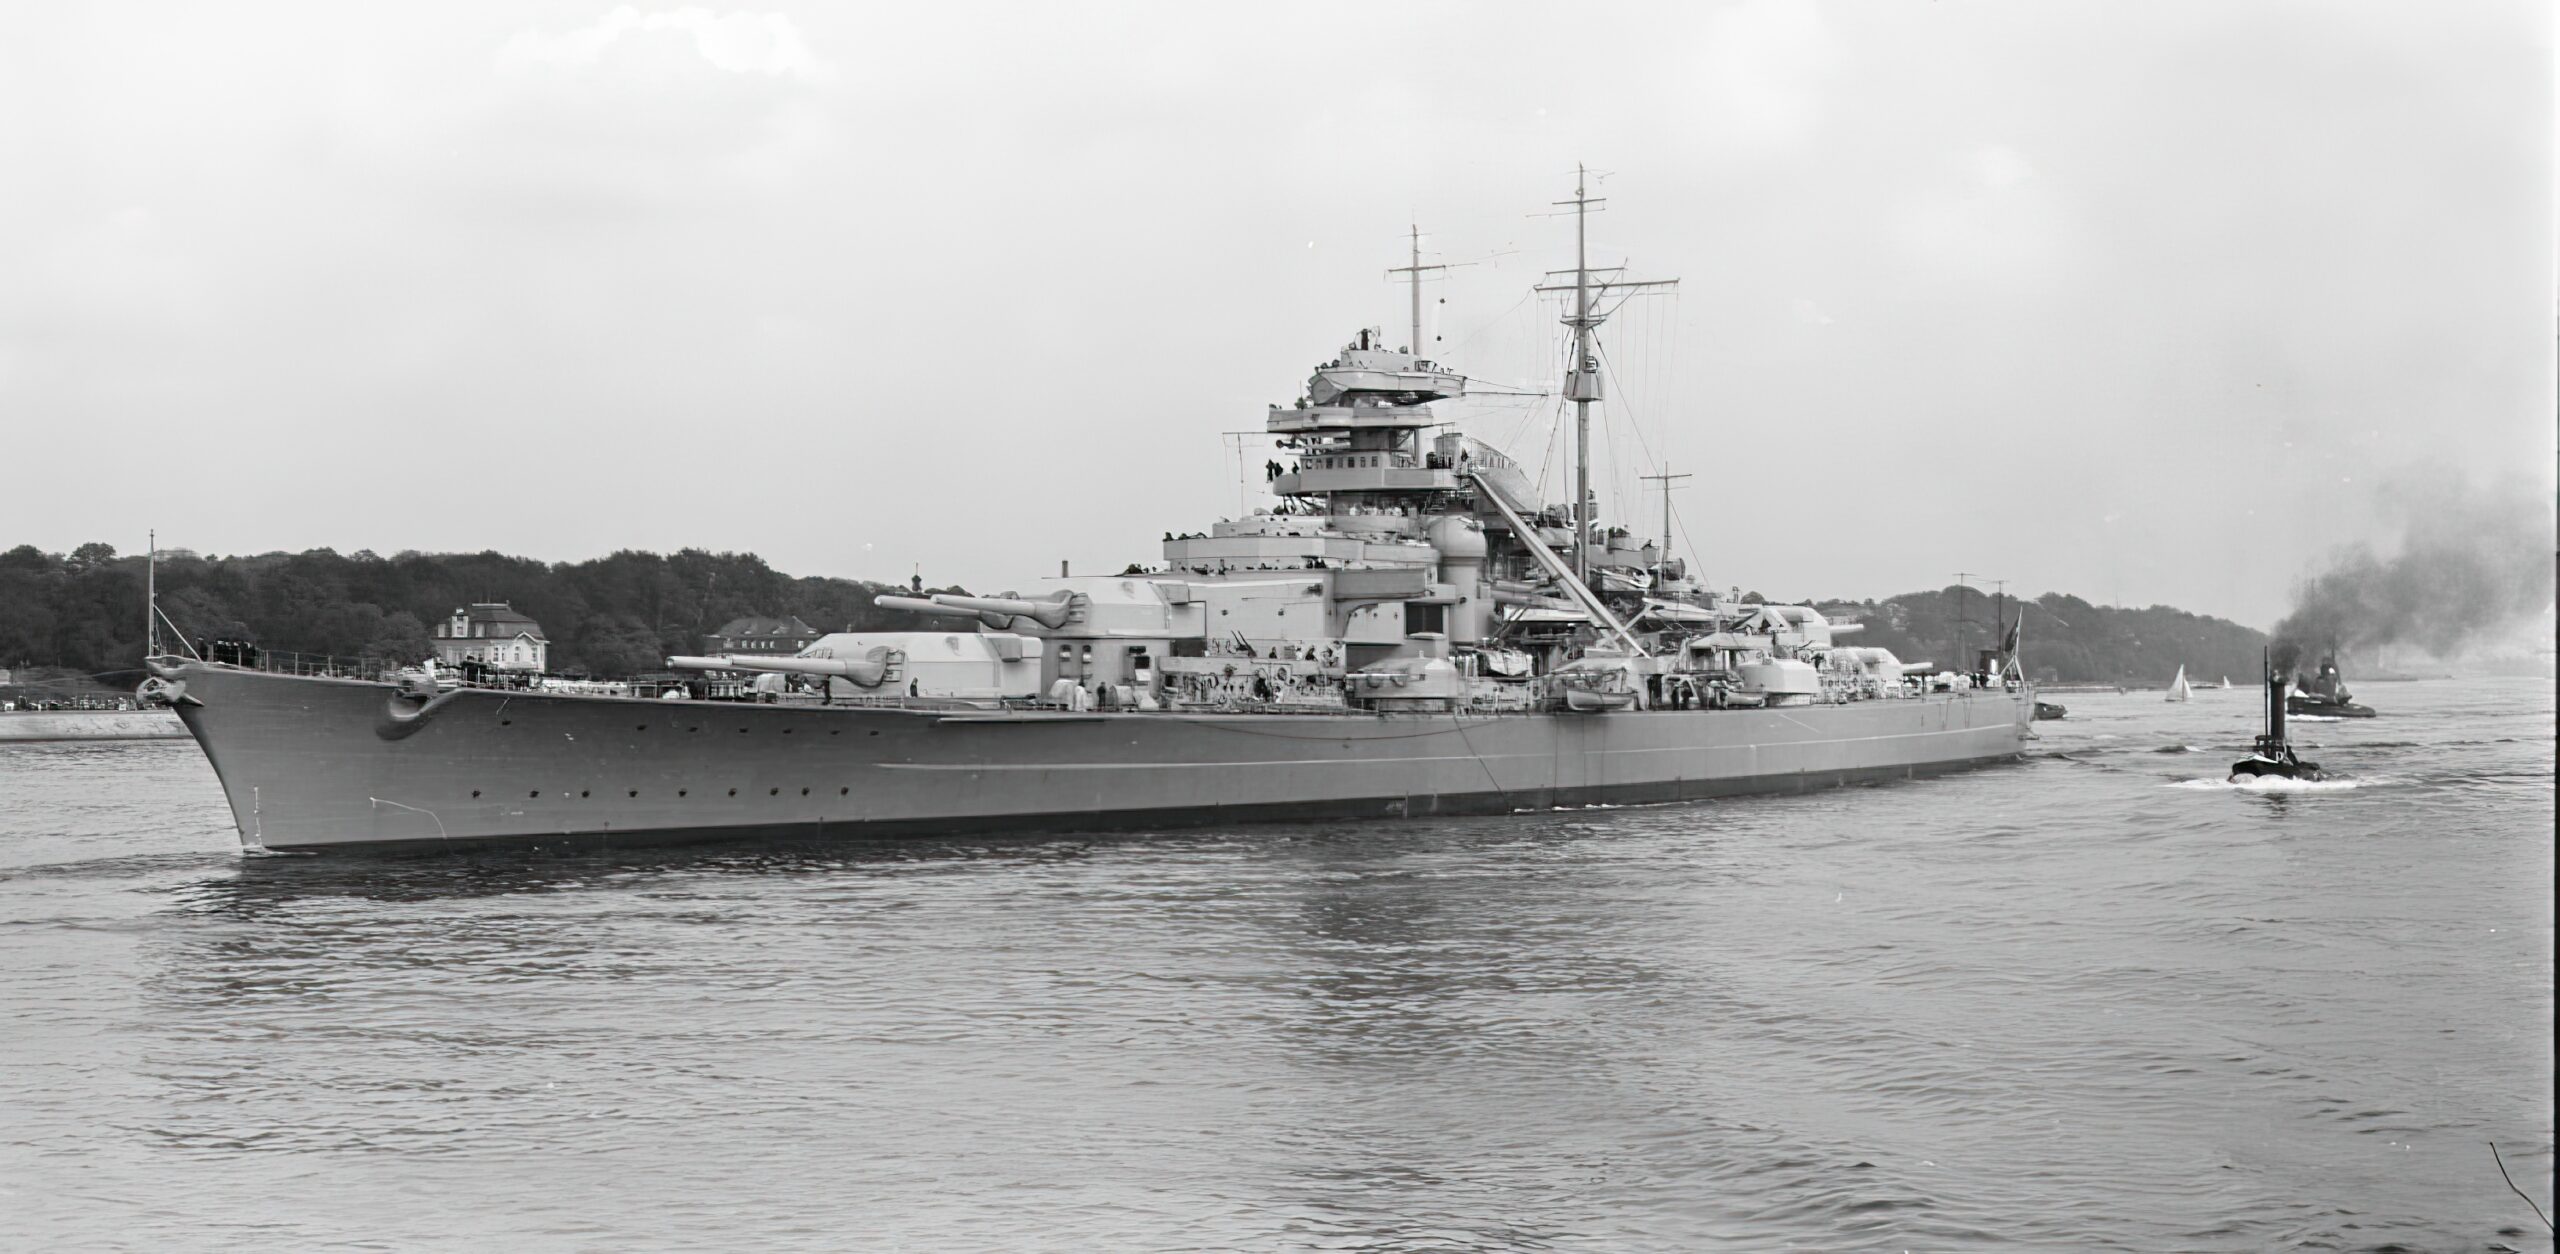 Battleship Bismarck off Blankenese, with the tugs Seefalke and Seebär at the stern